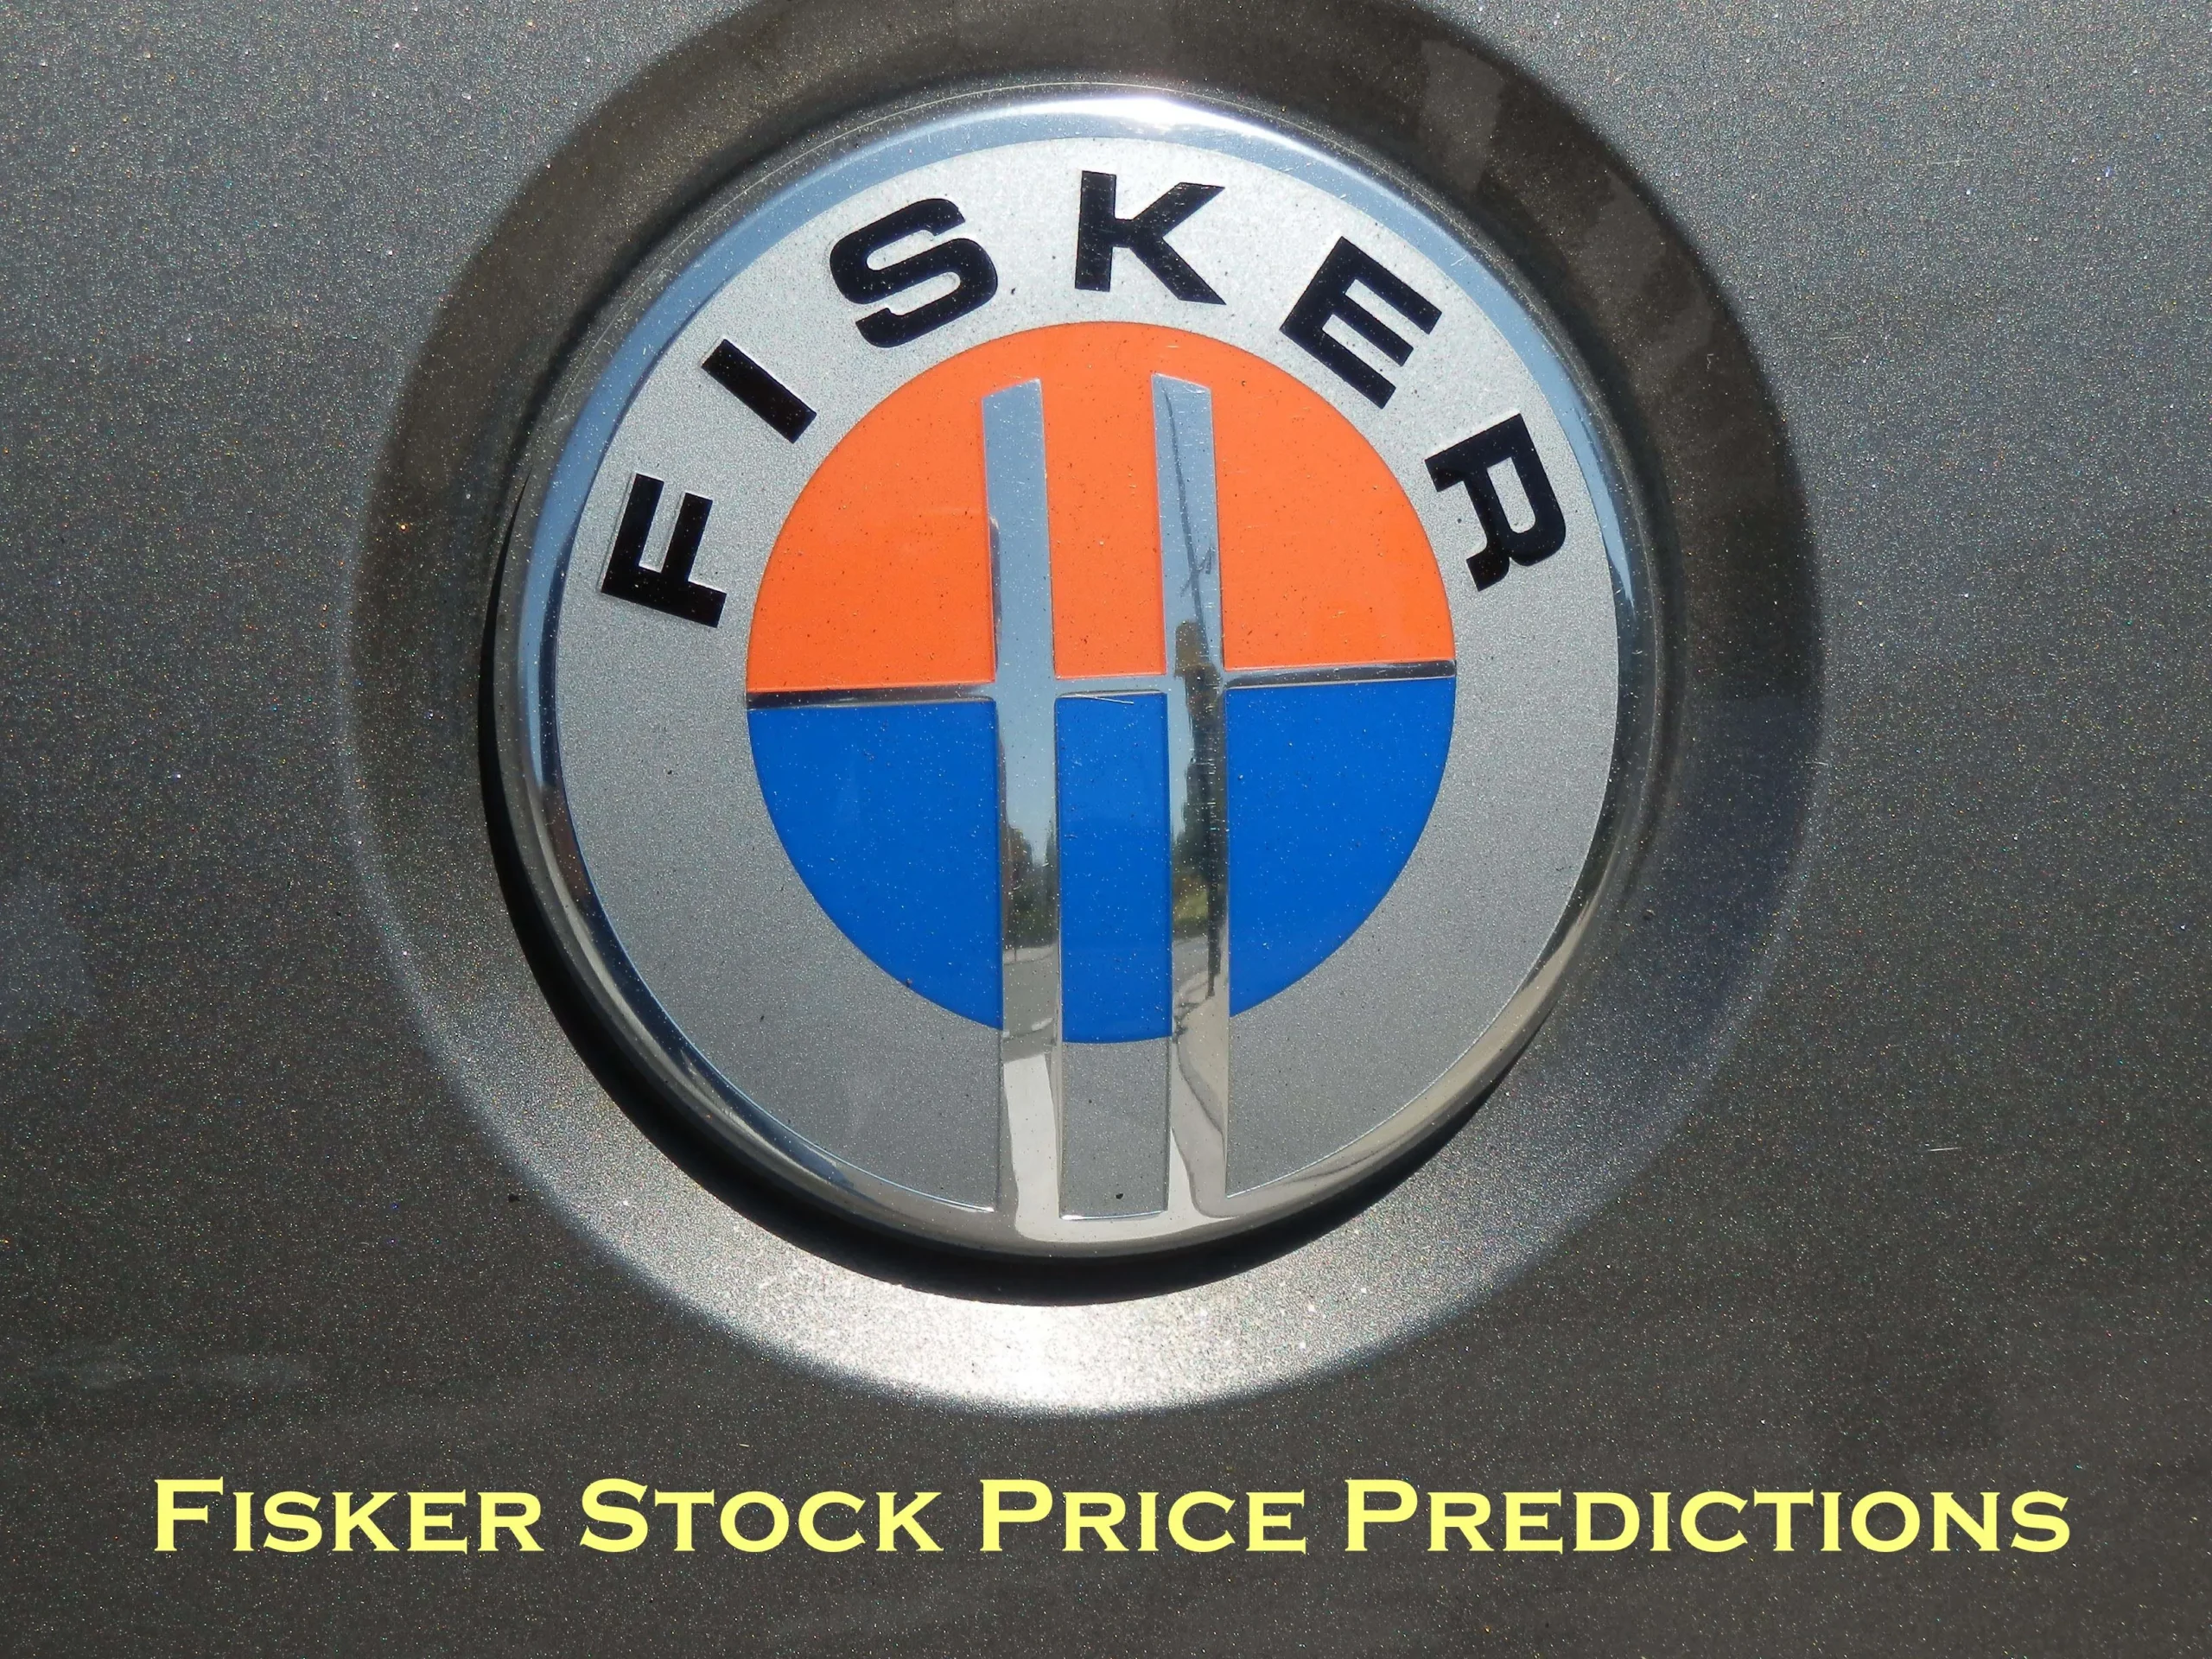 Fisker Stock Price Predictions for the Years 2023, 2025, 2030, 2040